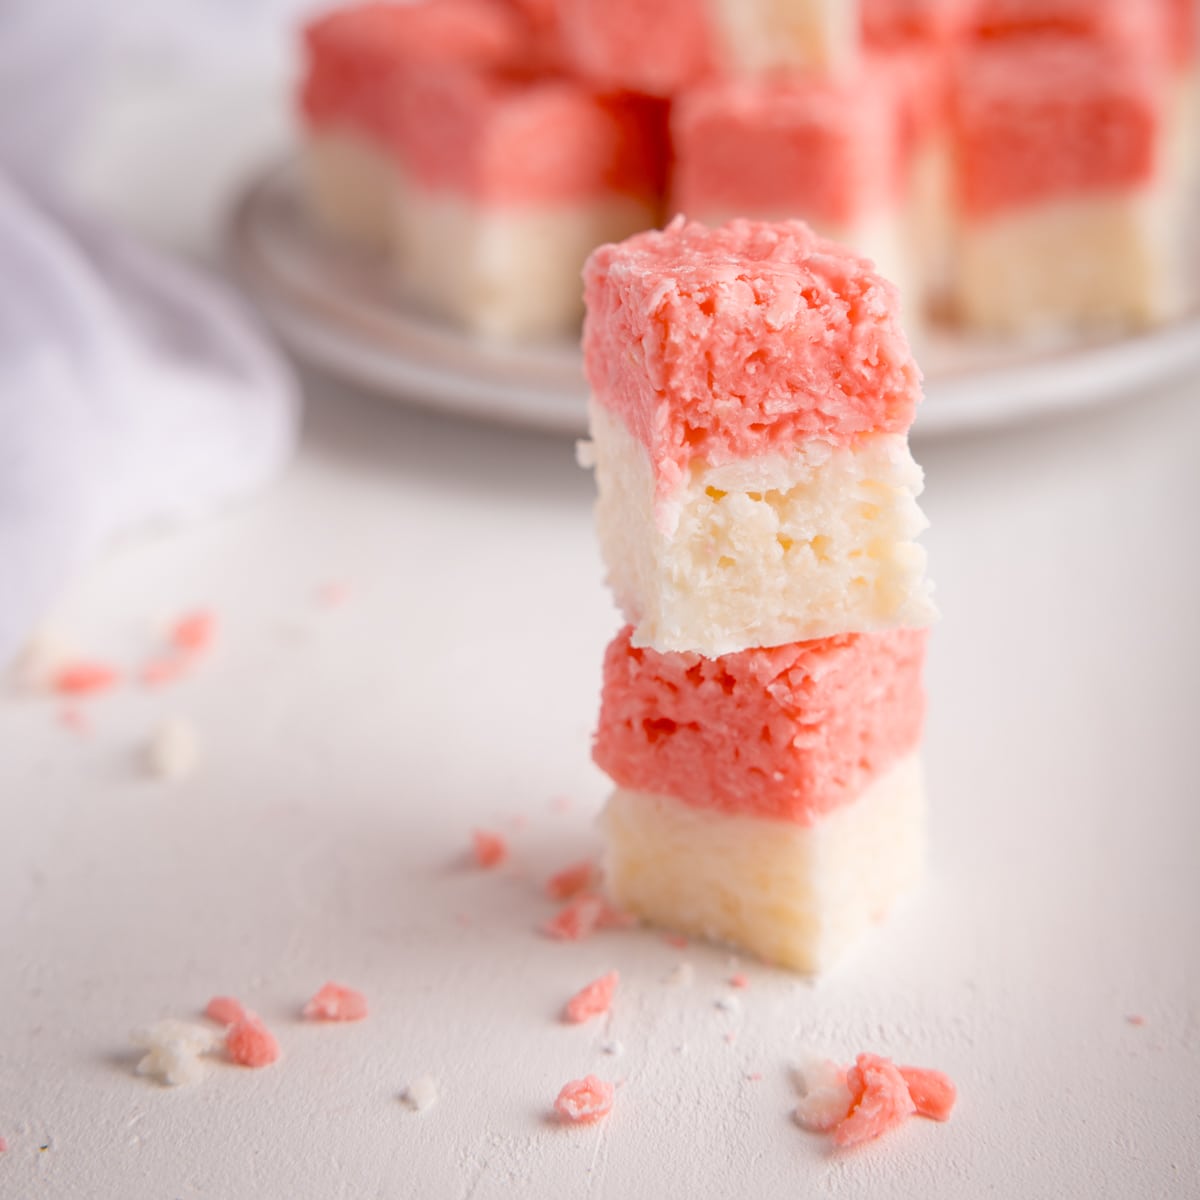 Two cubes of pink and white coconut ice stacked on top of each other on a white surface. There is more coconut ice in the background on a white plate, alongside a white napkin.